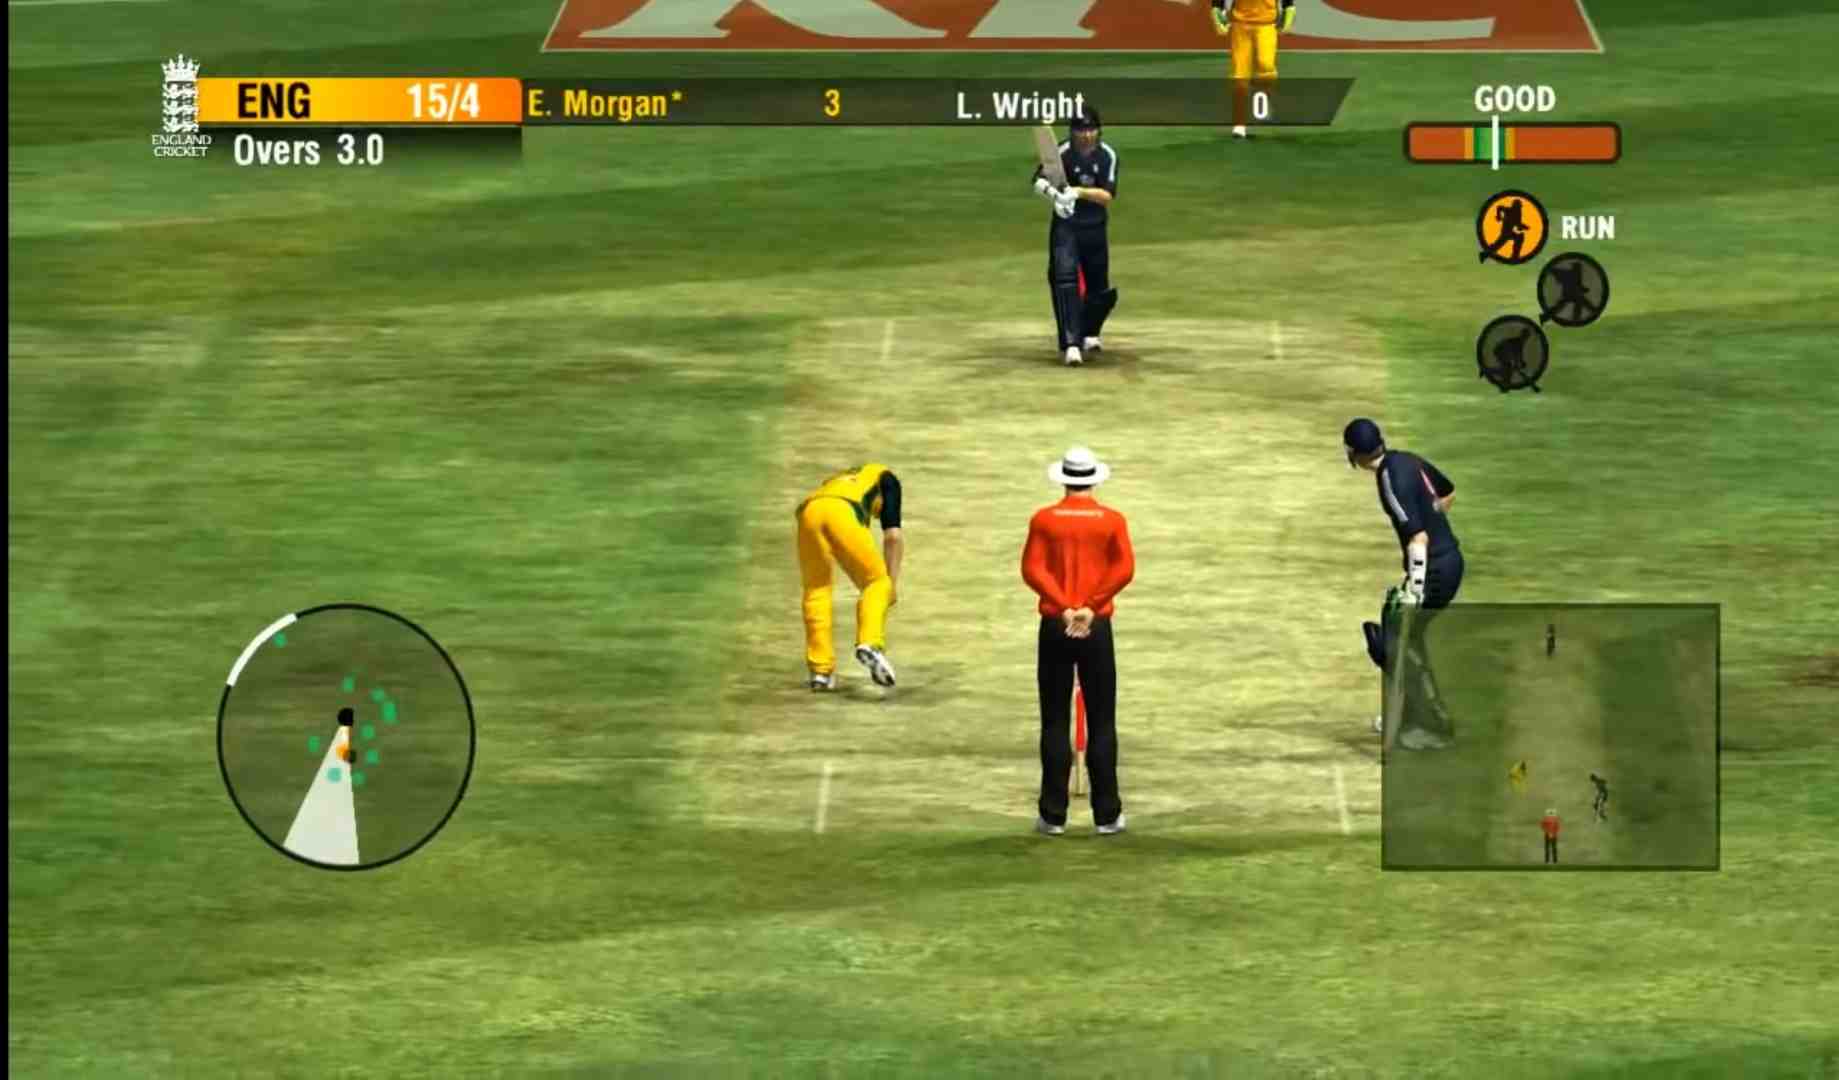 3 New Cricket Games For Windows PC In 2022